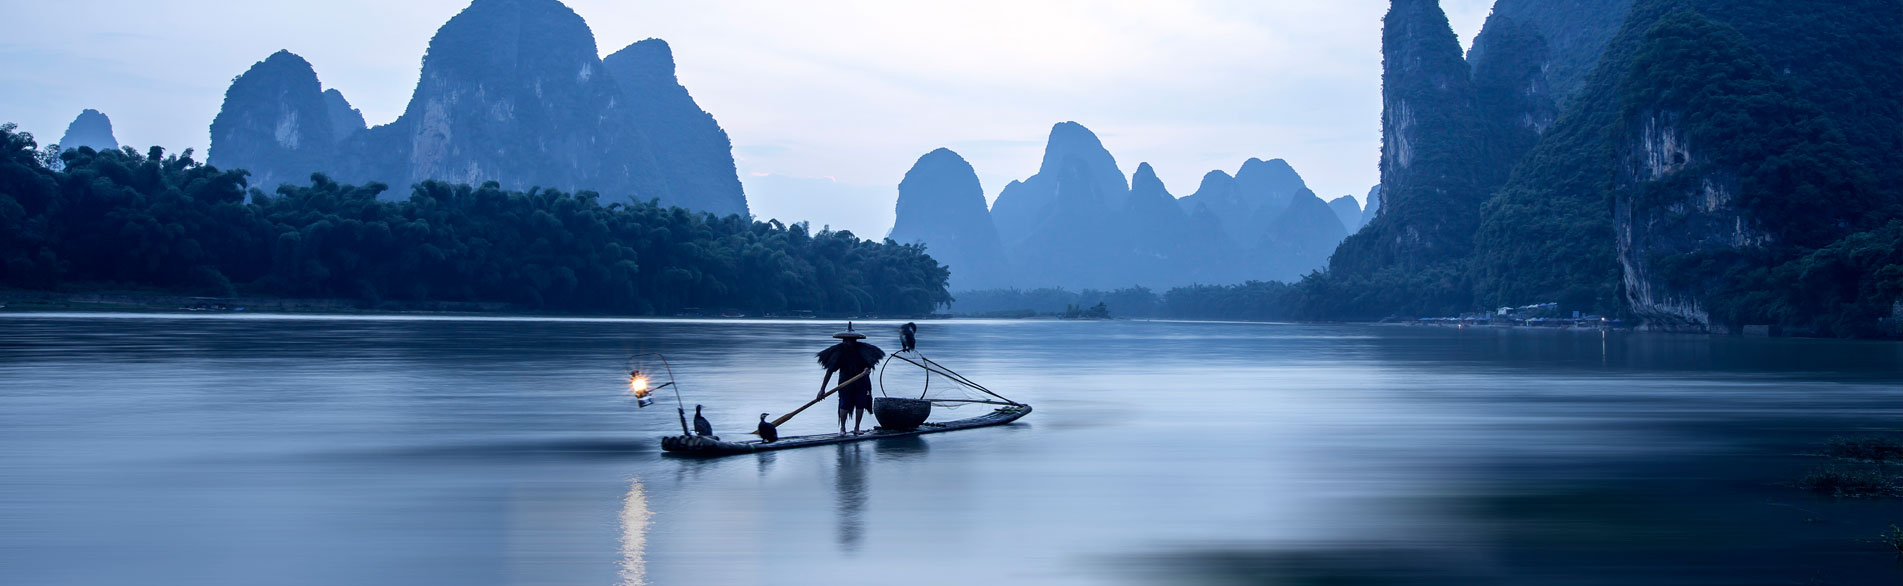 One-Day Yangshuo and Li River Highlights Tour